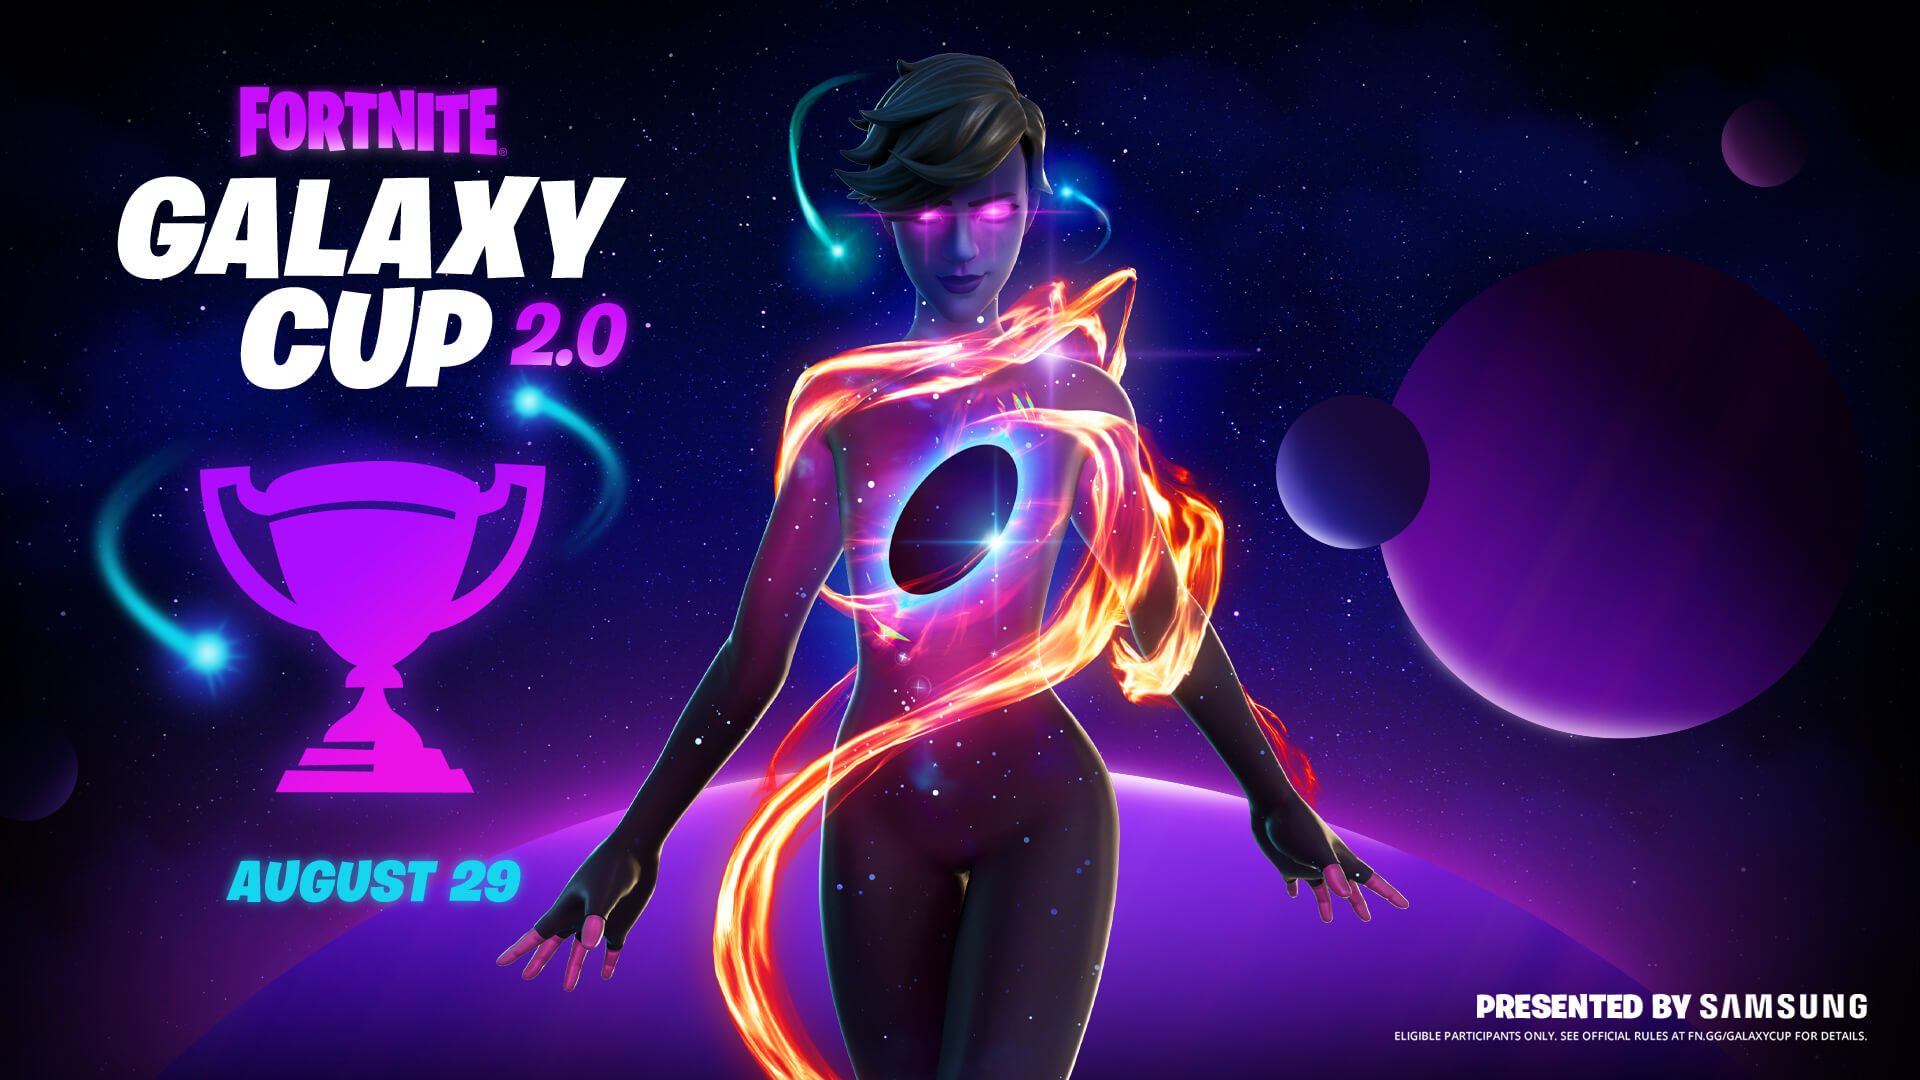 The Galaxy Cup 2.0 takes place August 29, Exclusive to Android